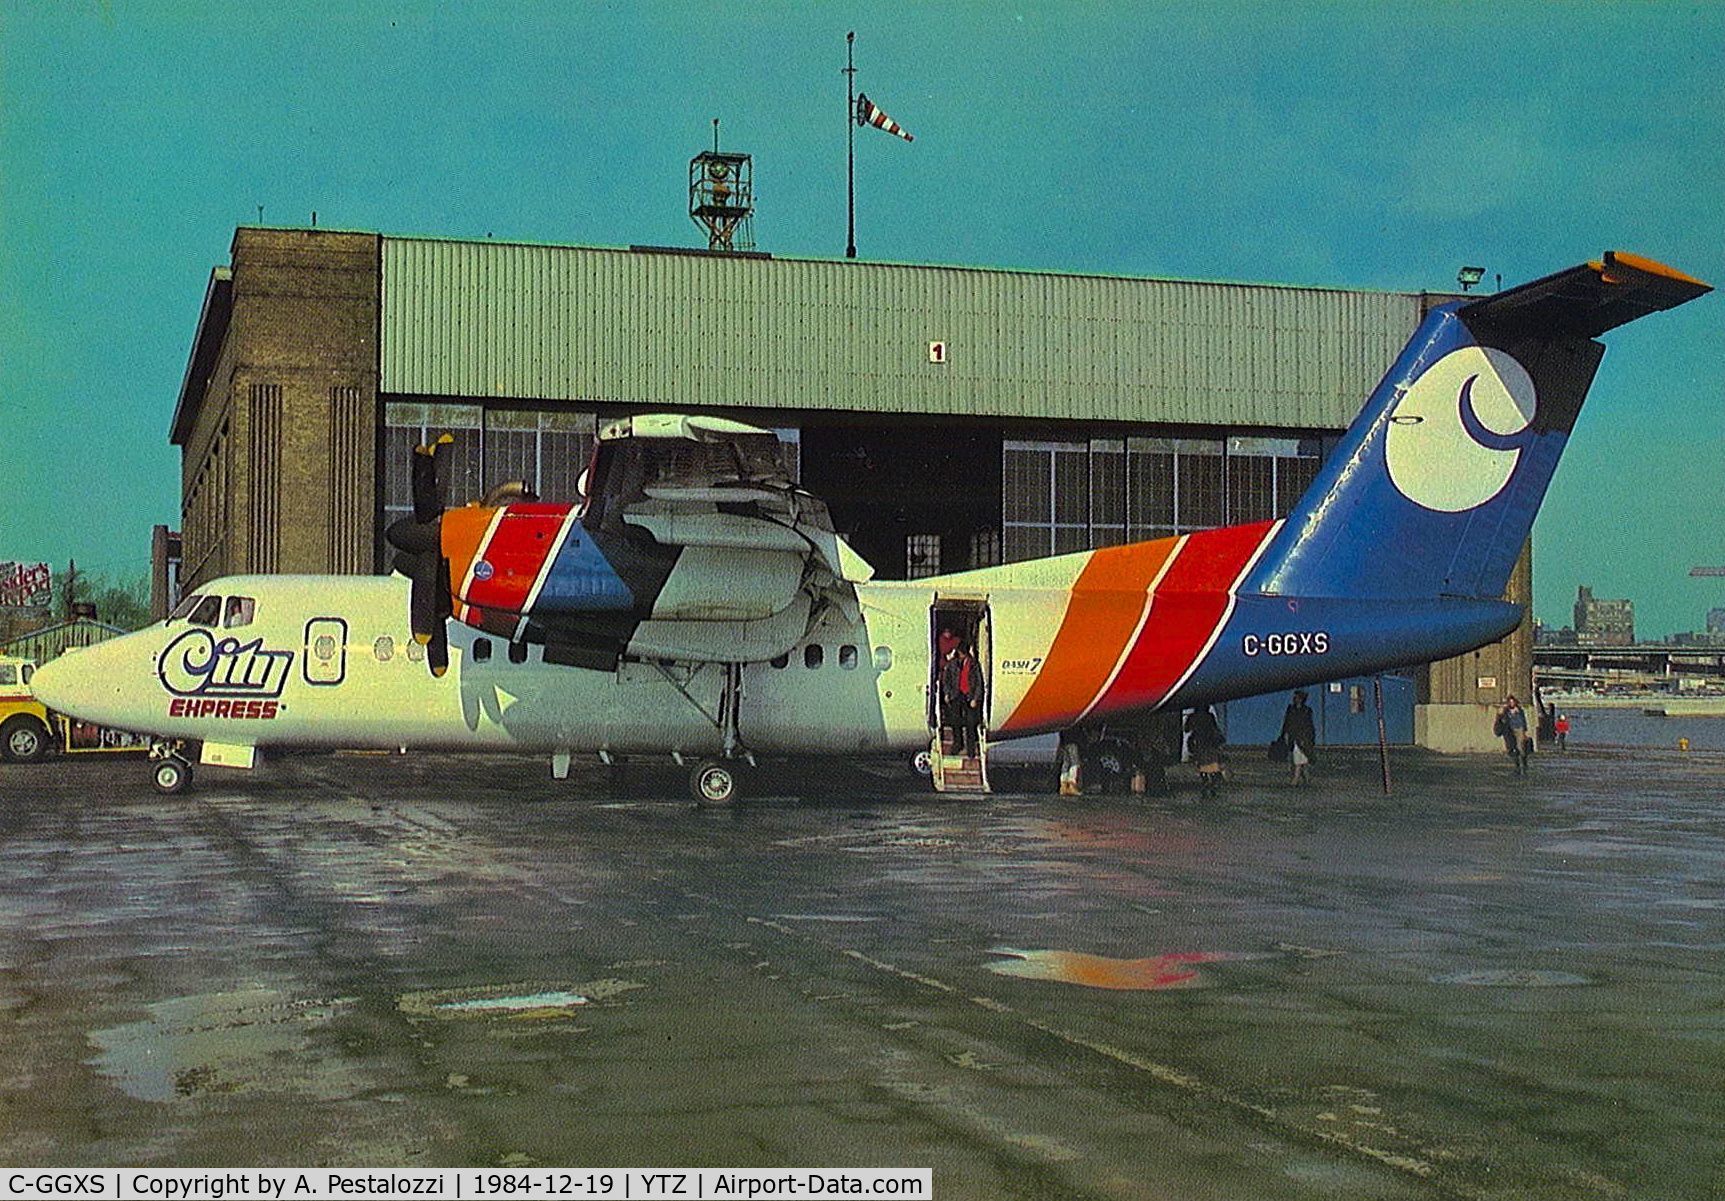 C-GGXS, 1981 De Havilland Canada DHC-7-102 Dash 7 C/N 64, This photograph may contain copyrighted material. Such material is made available for educational purposes only. This constitutes a 'fair use' of any such copyrighted material as provided for in Title 17 U.S.C. section 106A-117 of the U.S. Copyright Law.